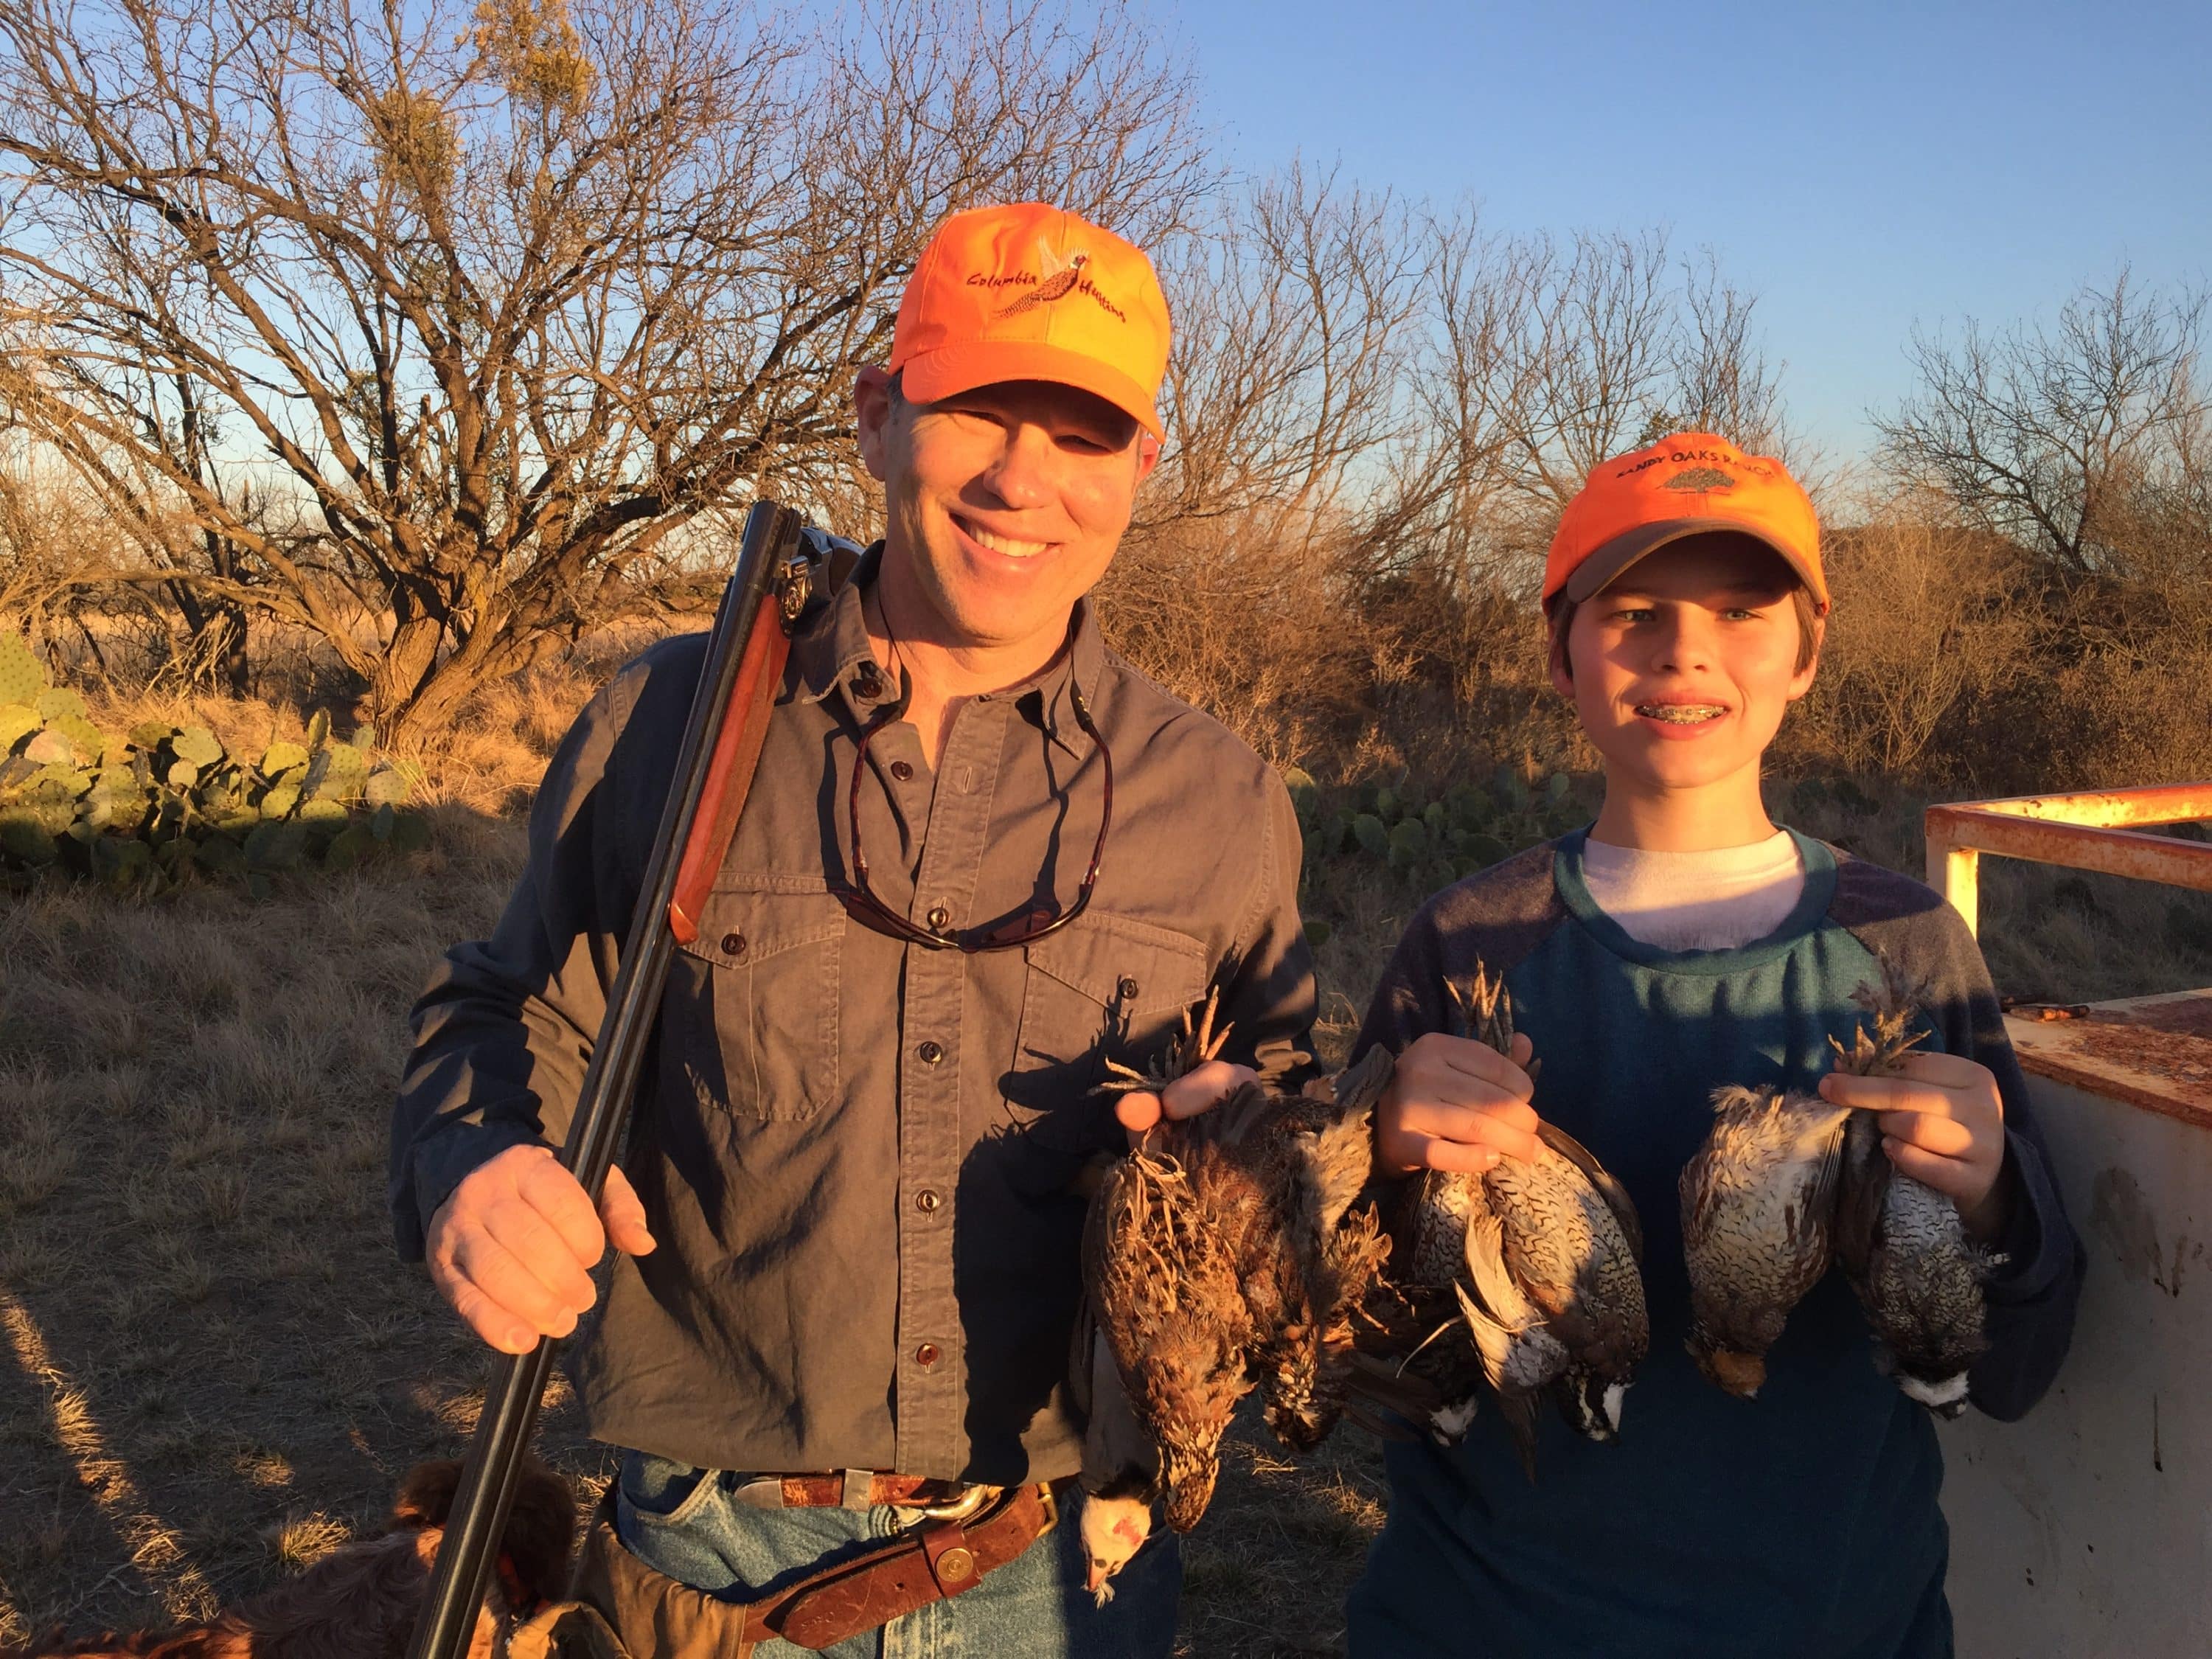 David and his son Memo on a hunt